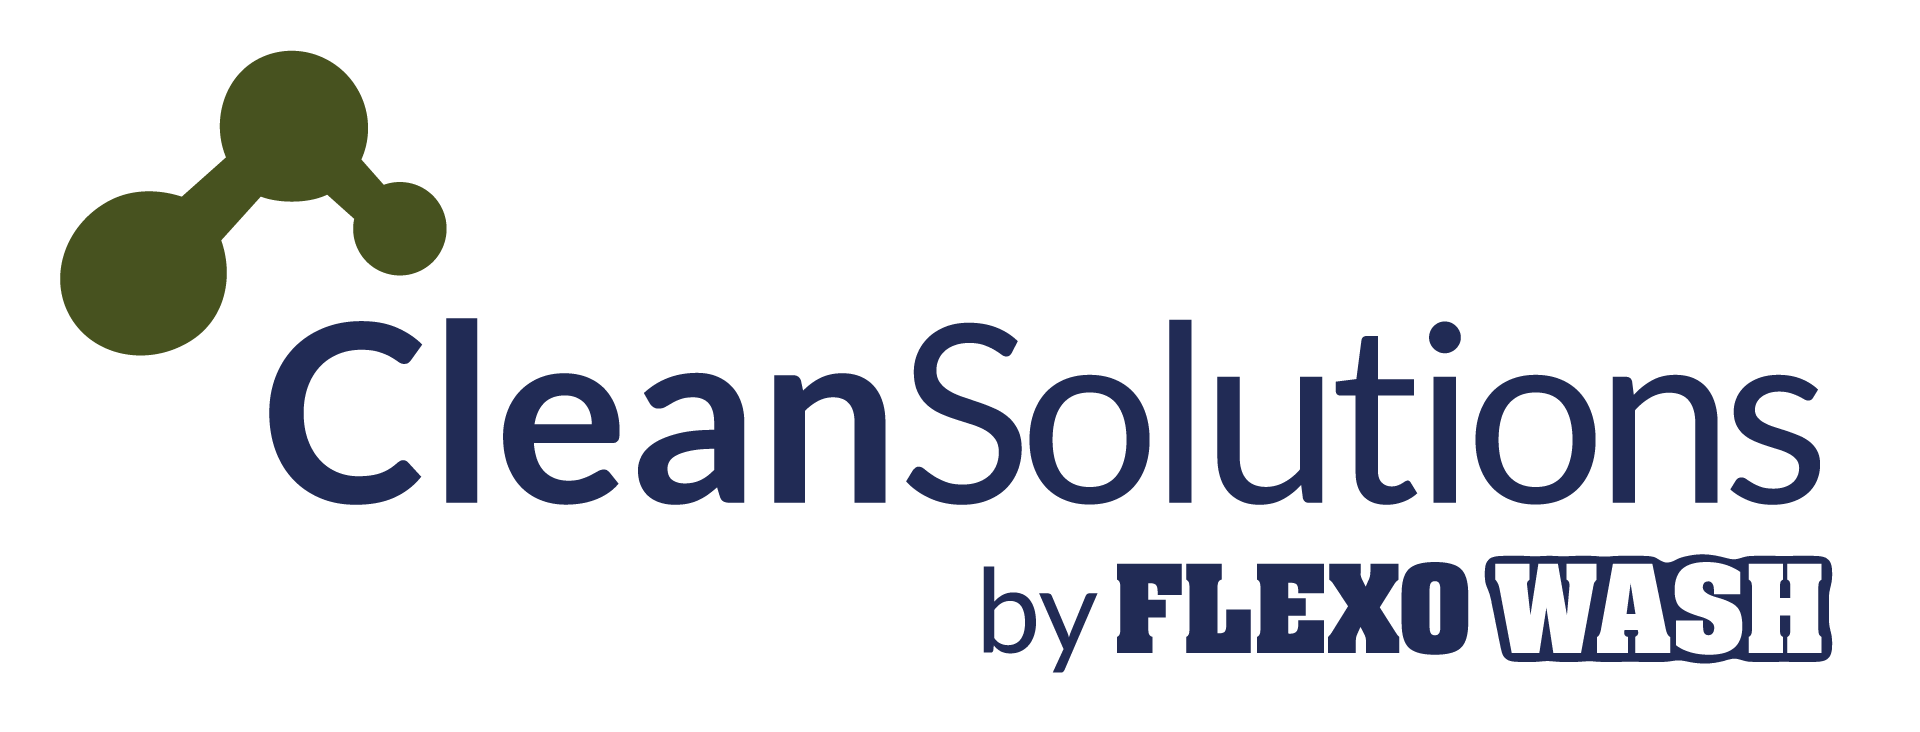 CleanSolutions_logo_1920px_white_background